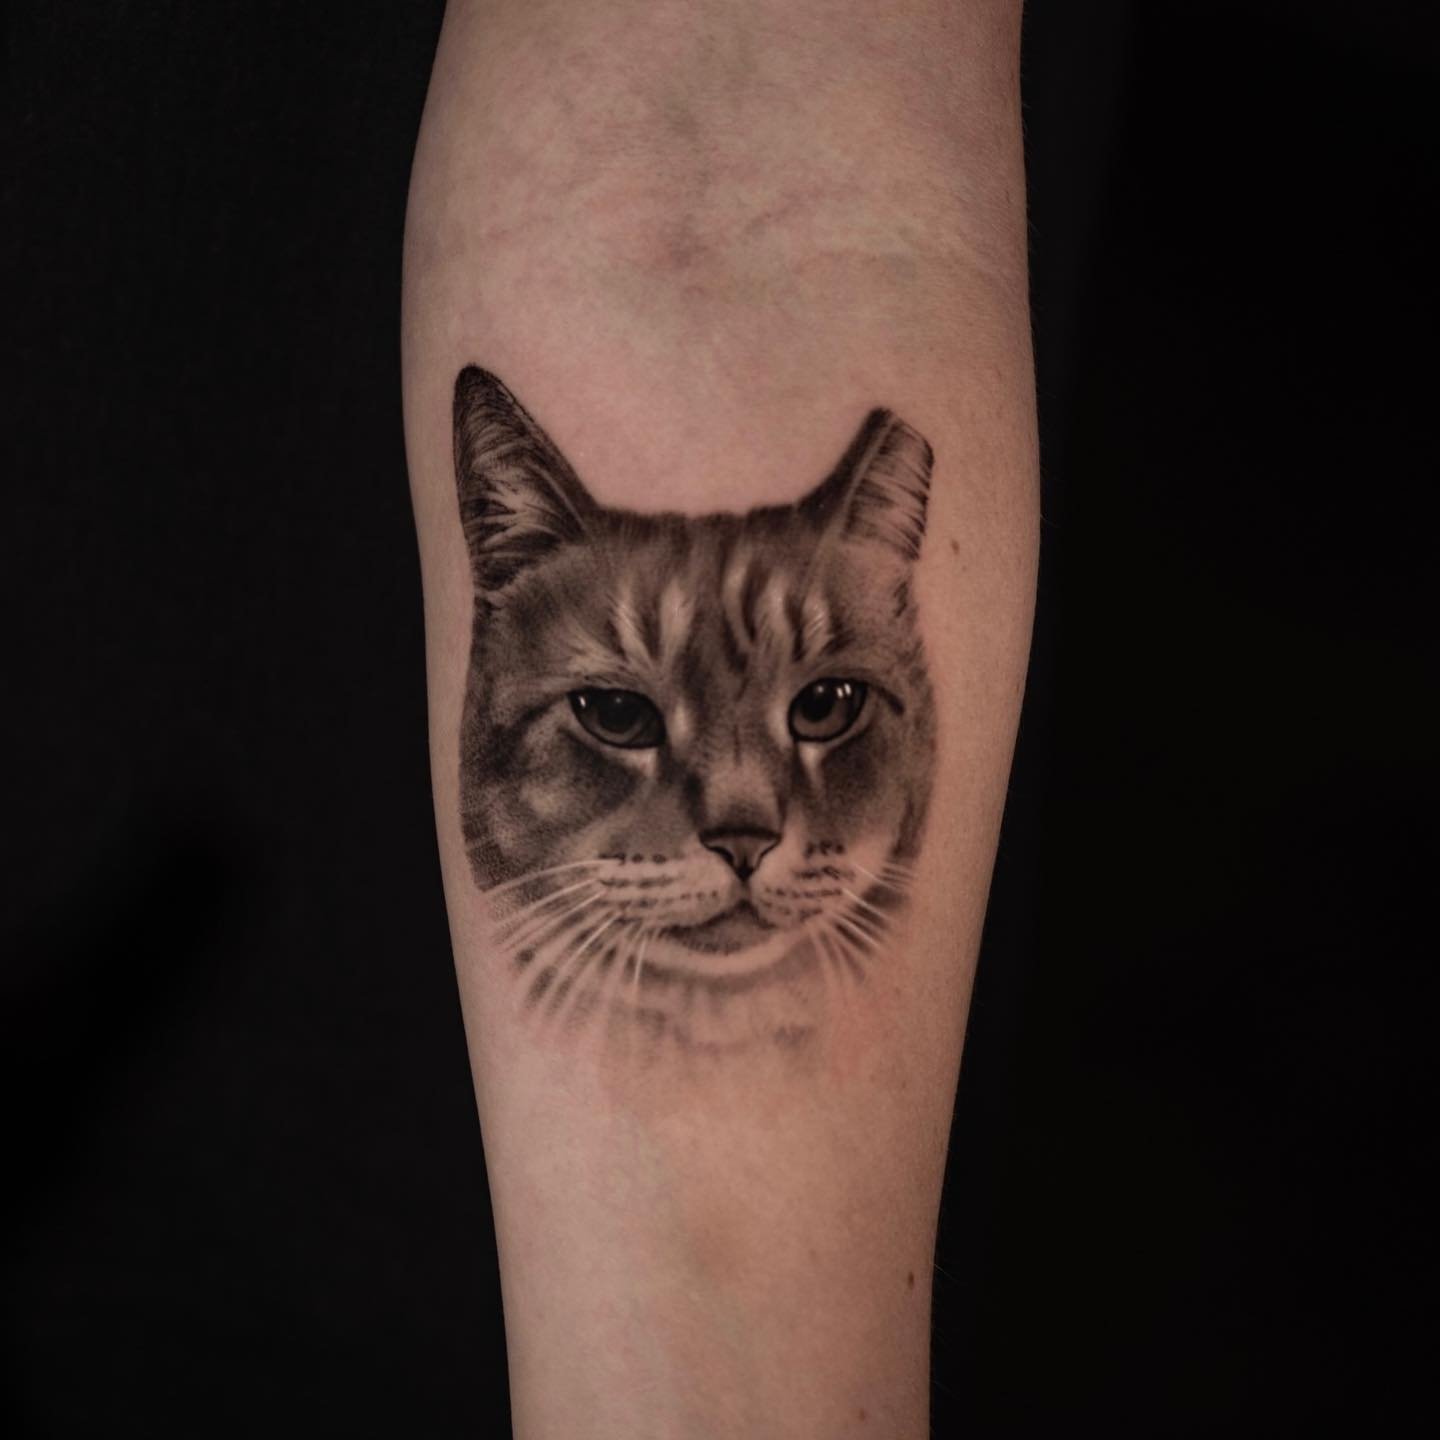 Pet portrait of a once feral cat. They snip the ear after they fix and release them. I love tattooing your pets so if you&rsquo;re wanting to have yours tattooed, let me know! @etherealtattoogallery 
.
.
.
.
.
.
.
.
.
.
#tattoo # realism #cat #portra